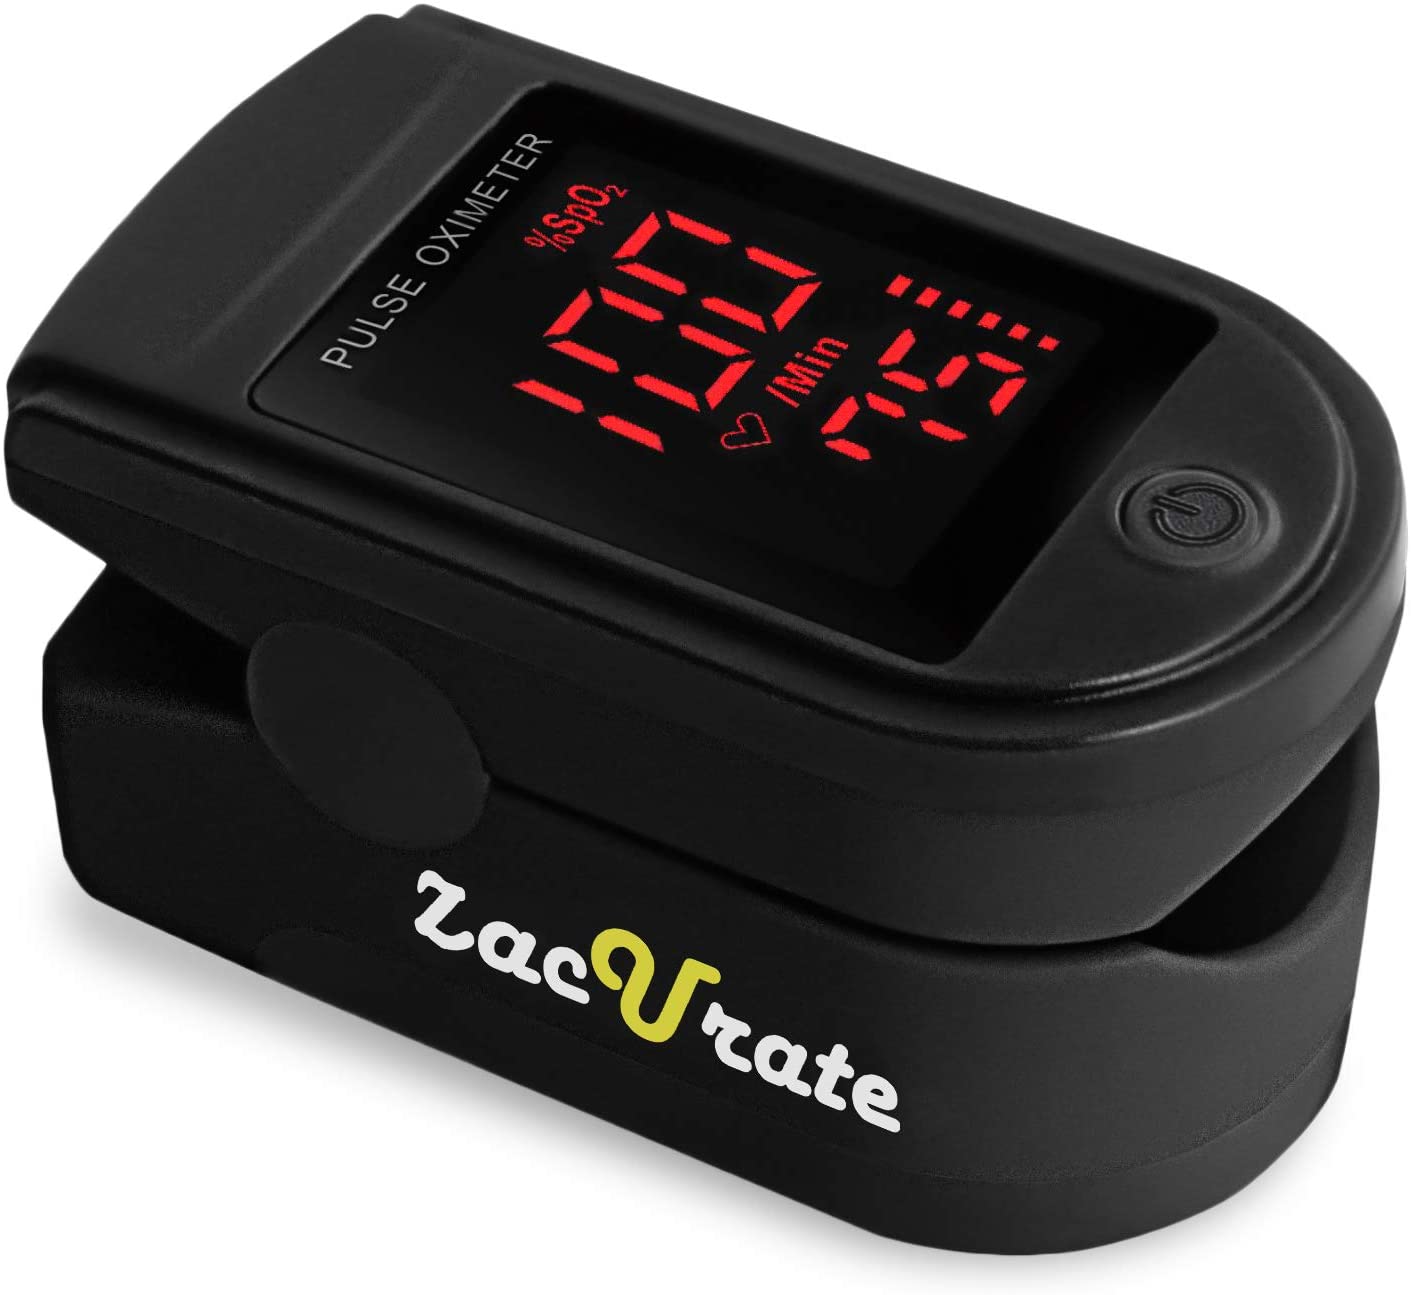 Zacurate Pro Series 500DL Fingertip Pulse Oximeter Blood Oxygen Saturation Monitor M430N-PRO-RB - Click Image to Close